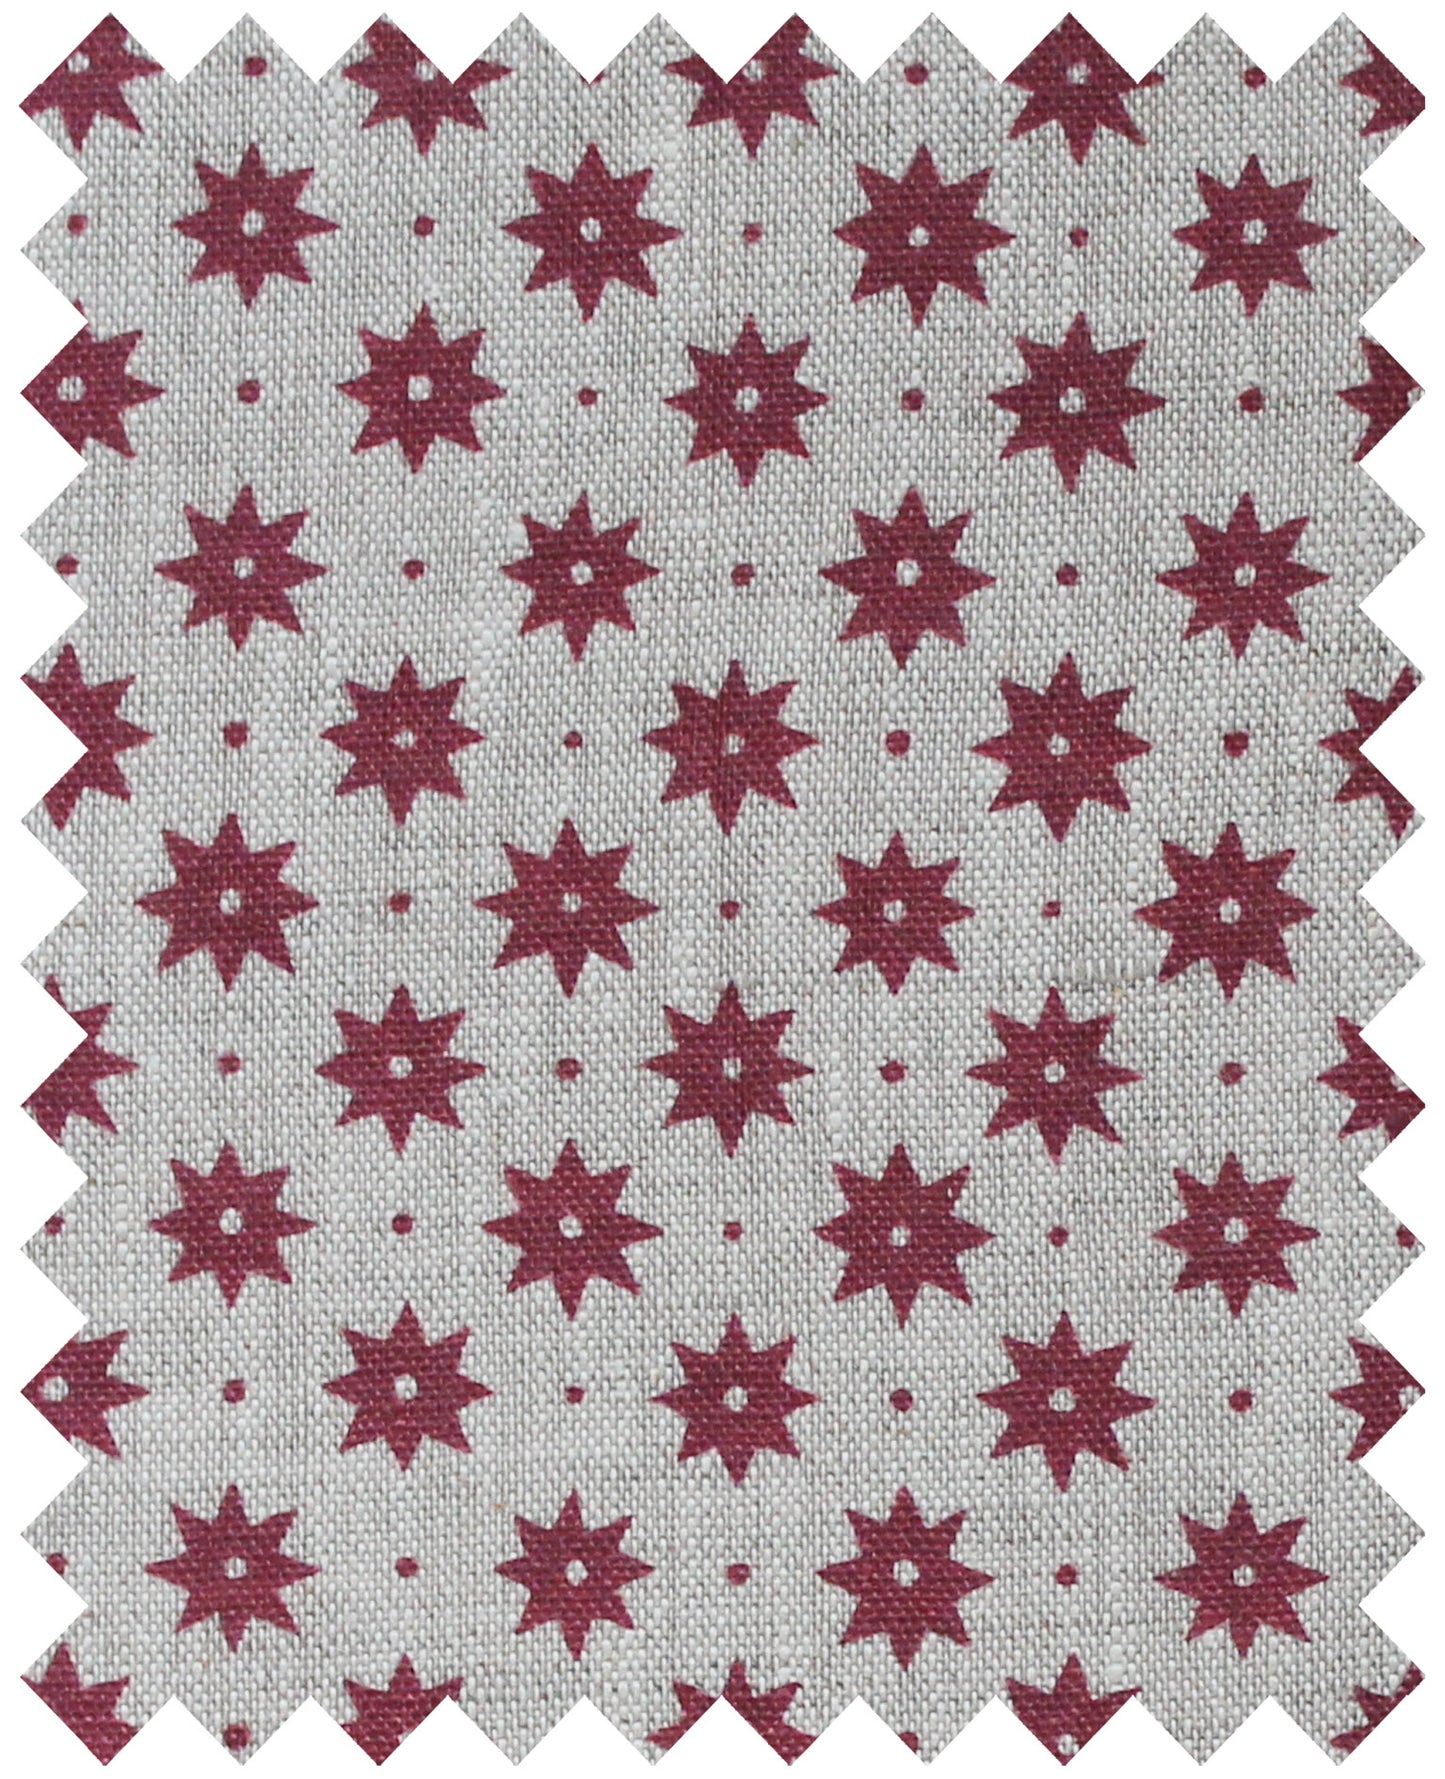 Petite Etoile French Raspberry - Natural Linen Swatch